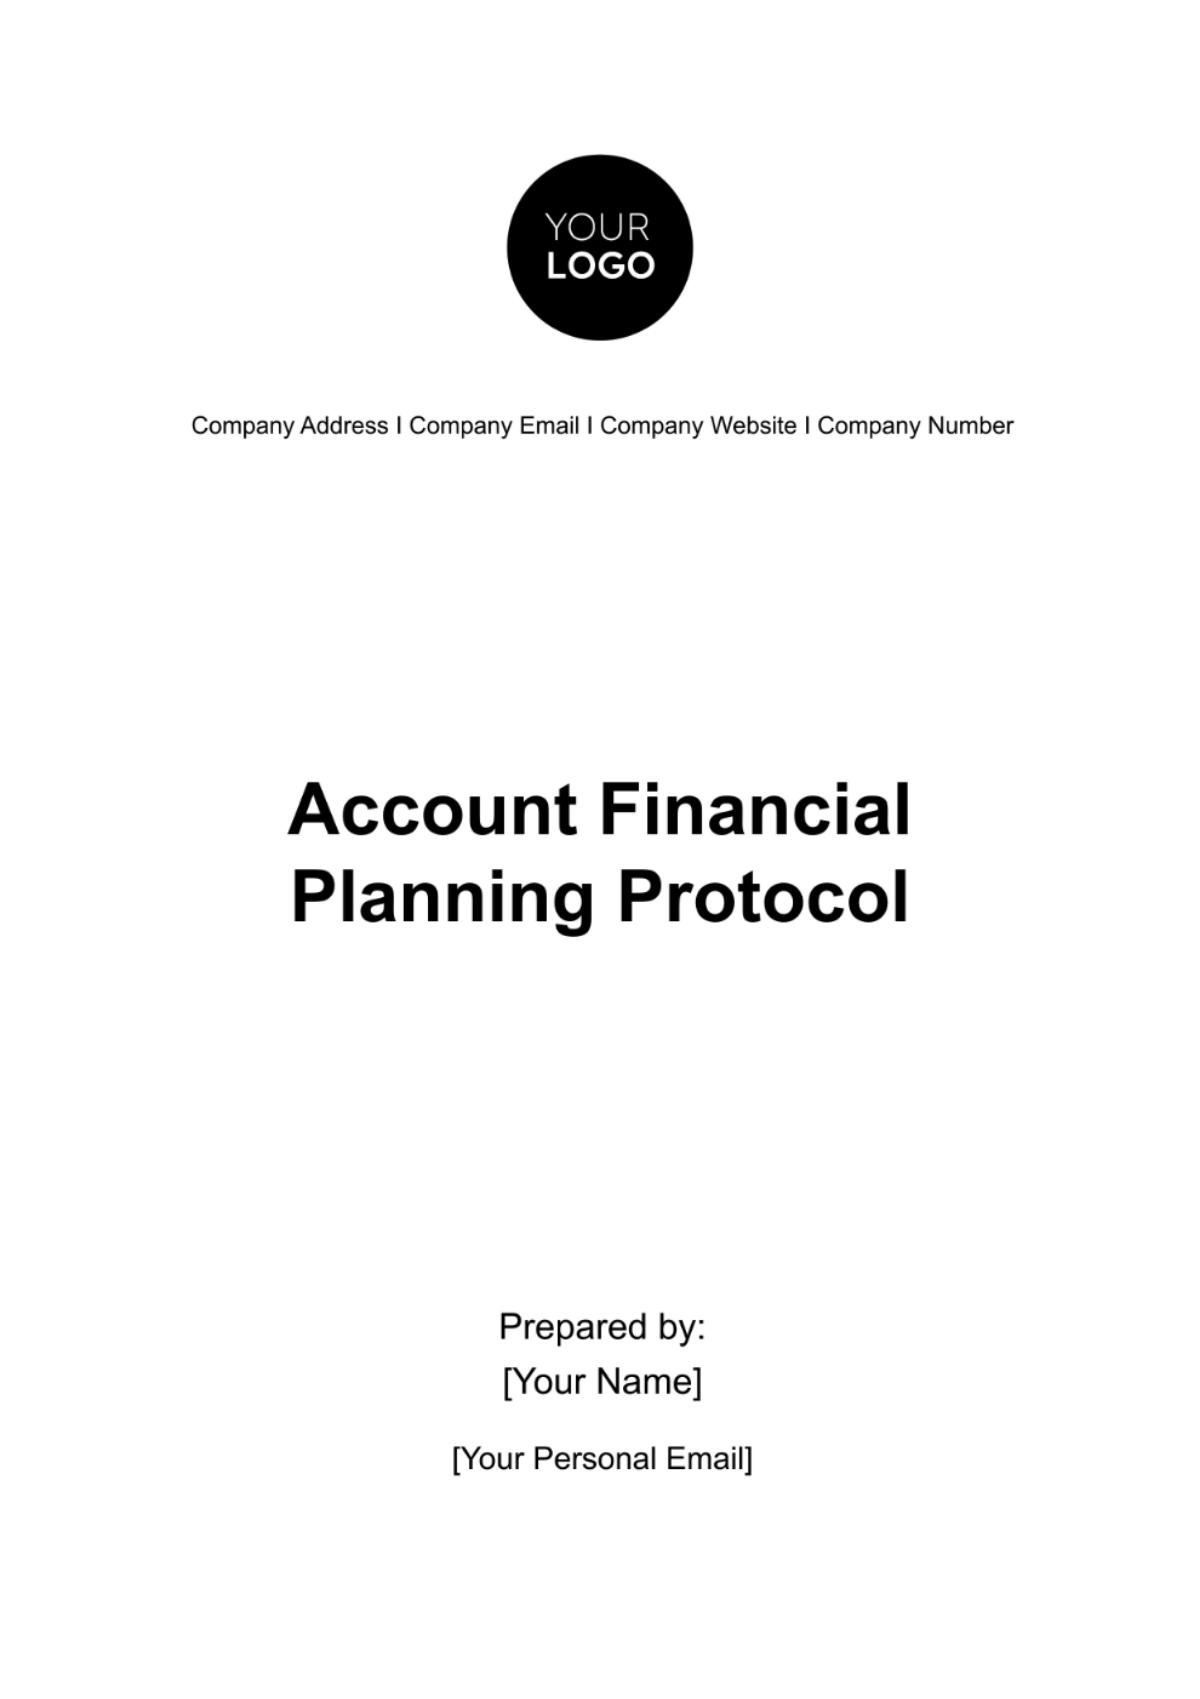 Account Financial Planning Protocol Template